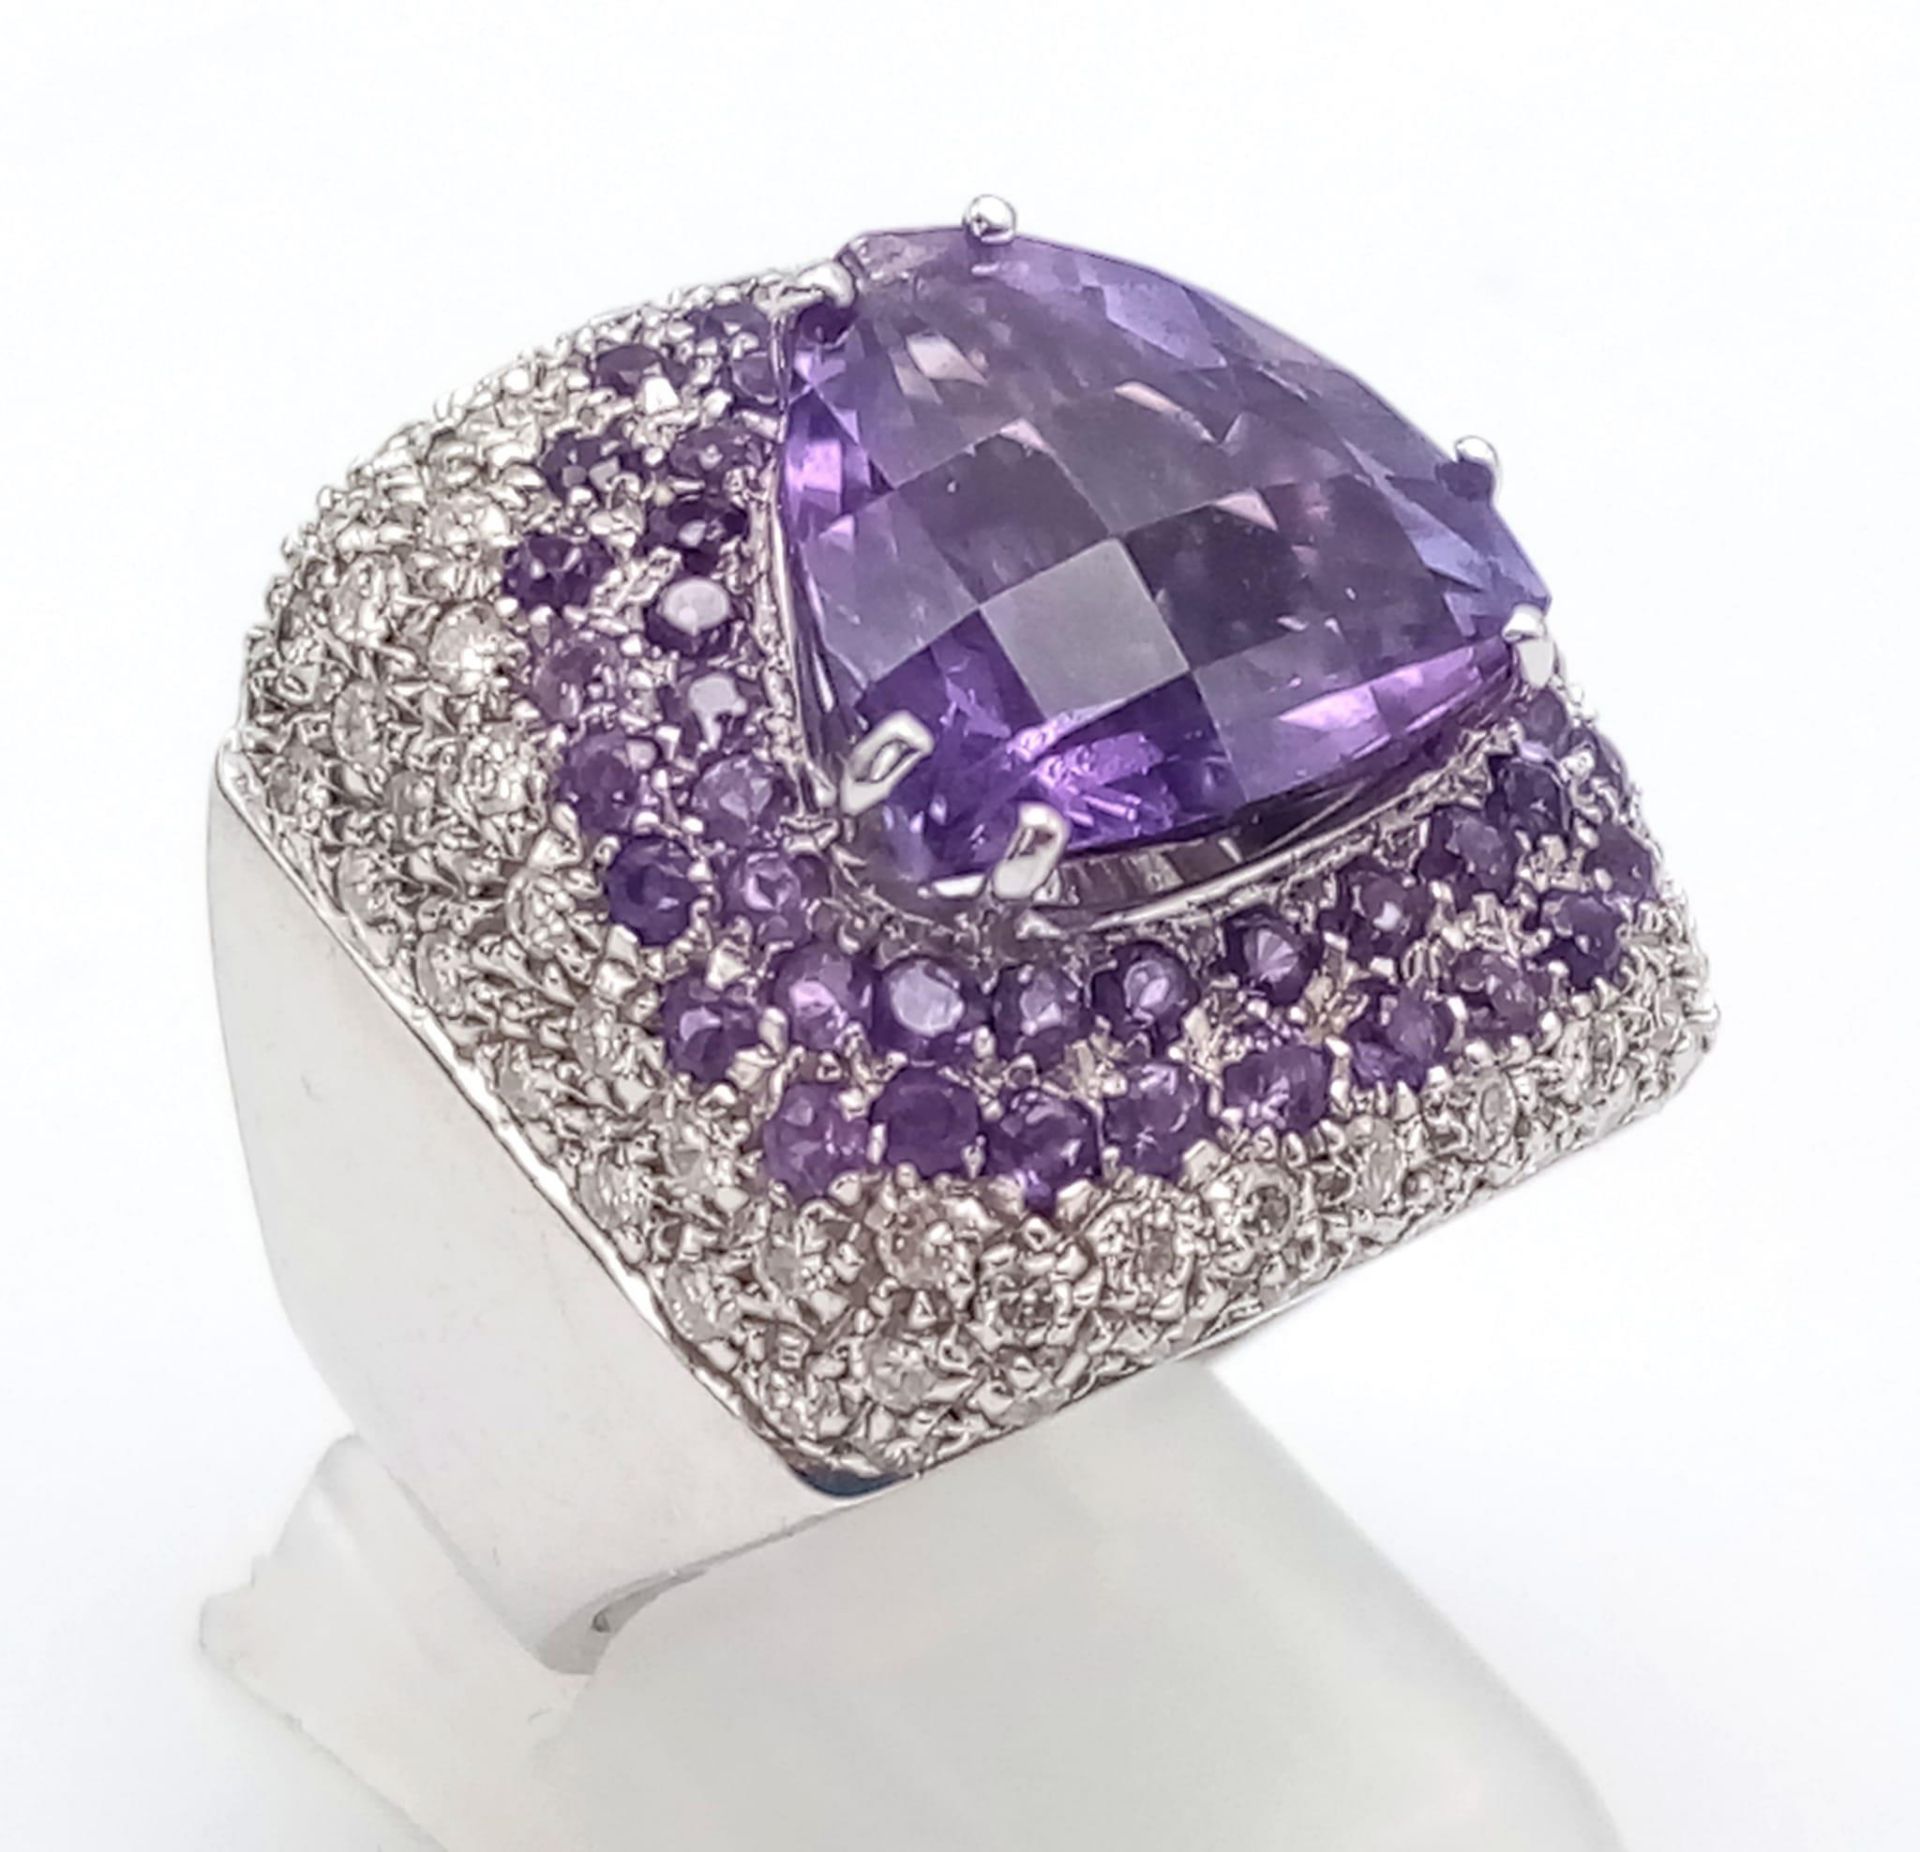 A FABULOUS 18K WHITE GOLD DIAMOND AND AMETHYST RING WITH MATCHING EARRINGS . 35.5gms - Image 4 of 12